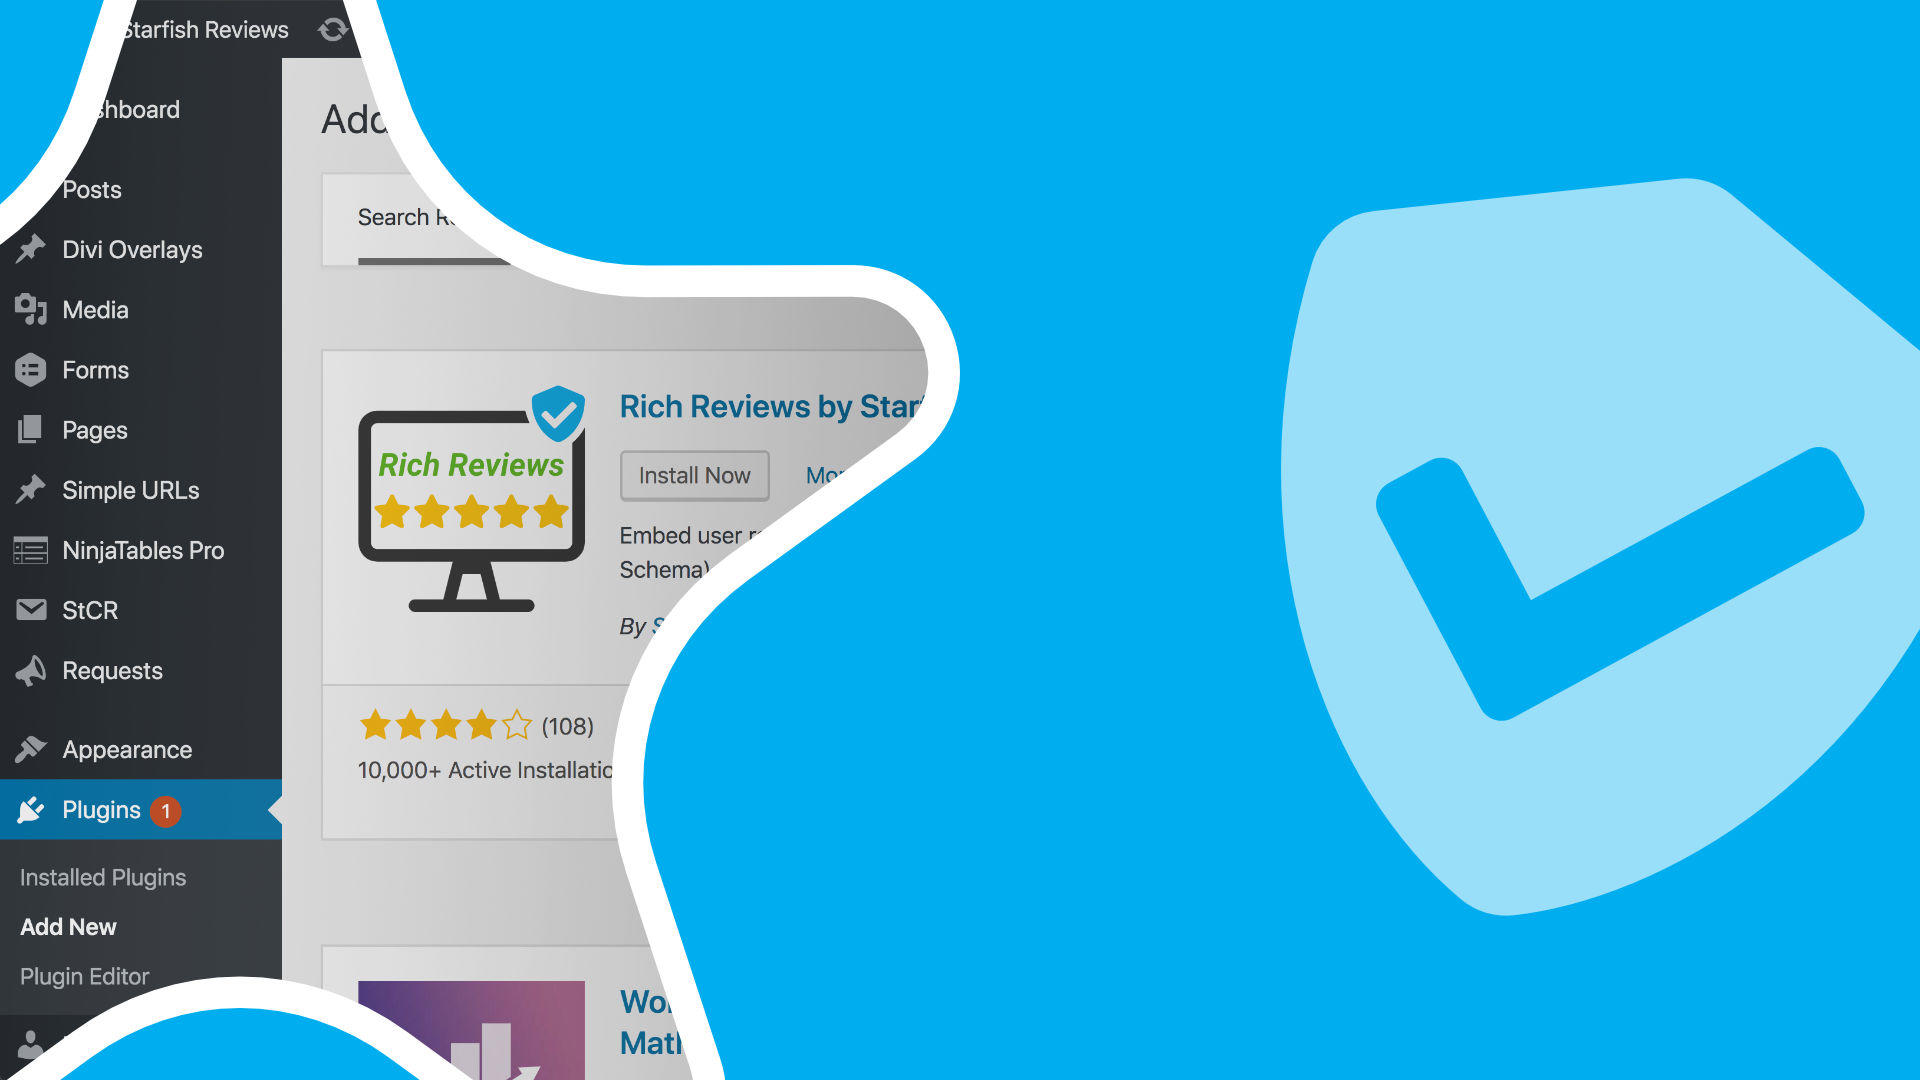 Rich Reviews WP plugin is patched and secure